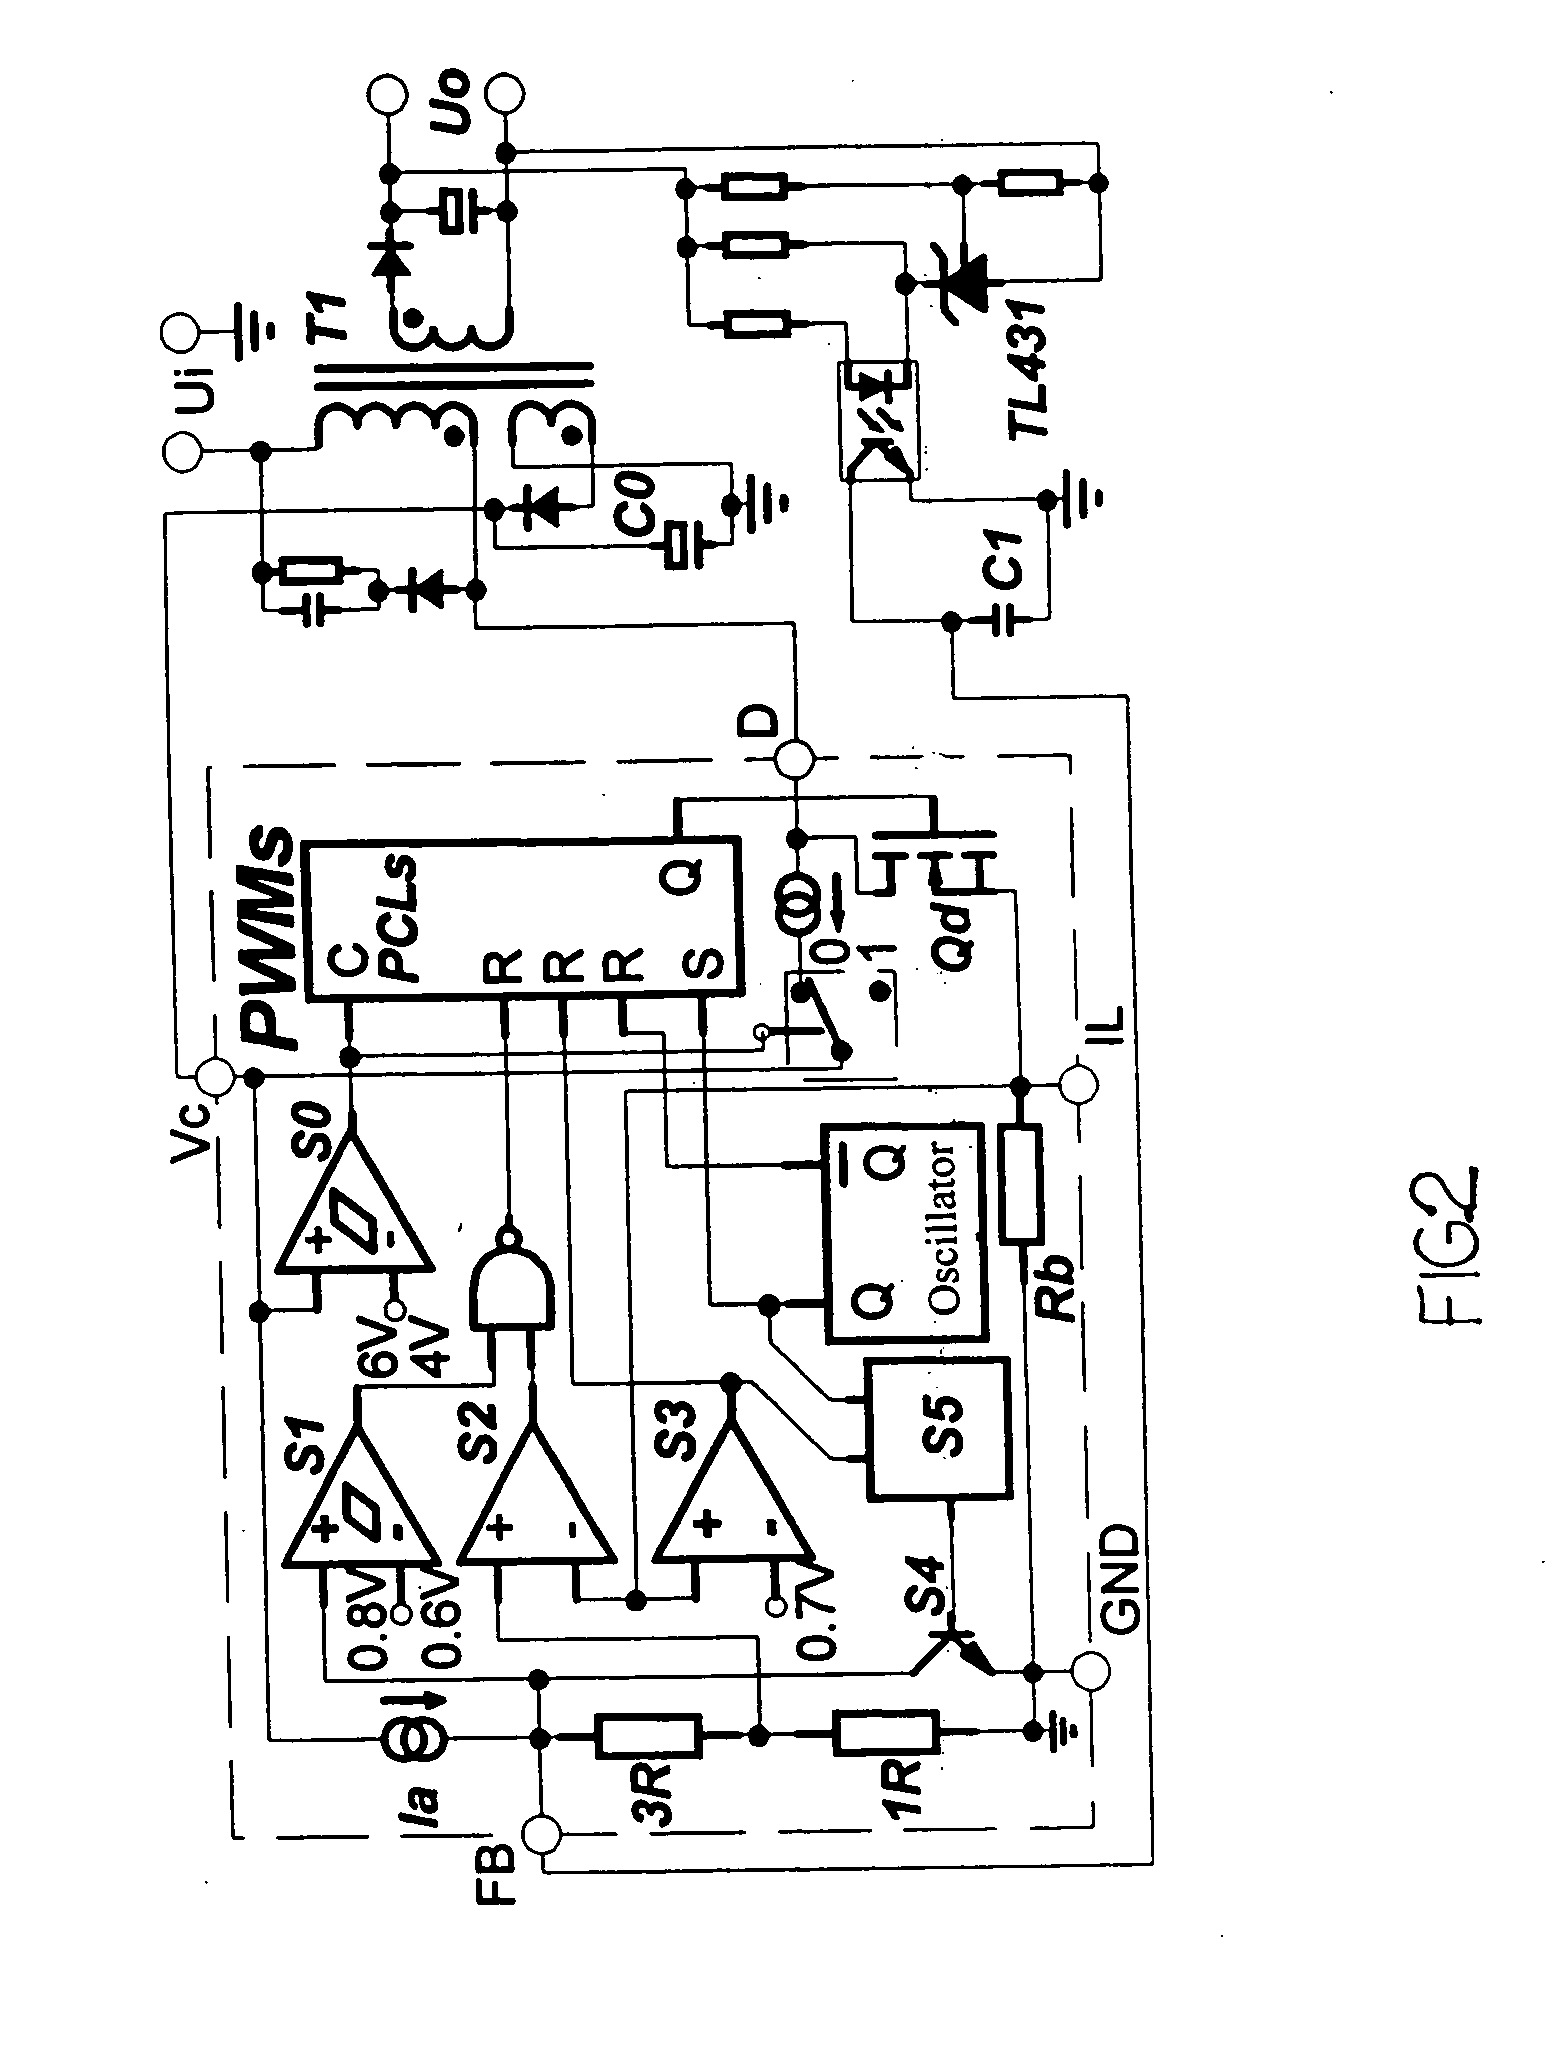 Green switch power supply with standby function and its ic